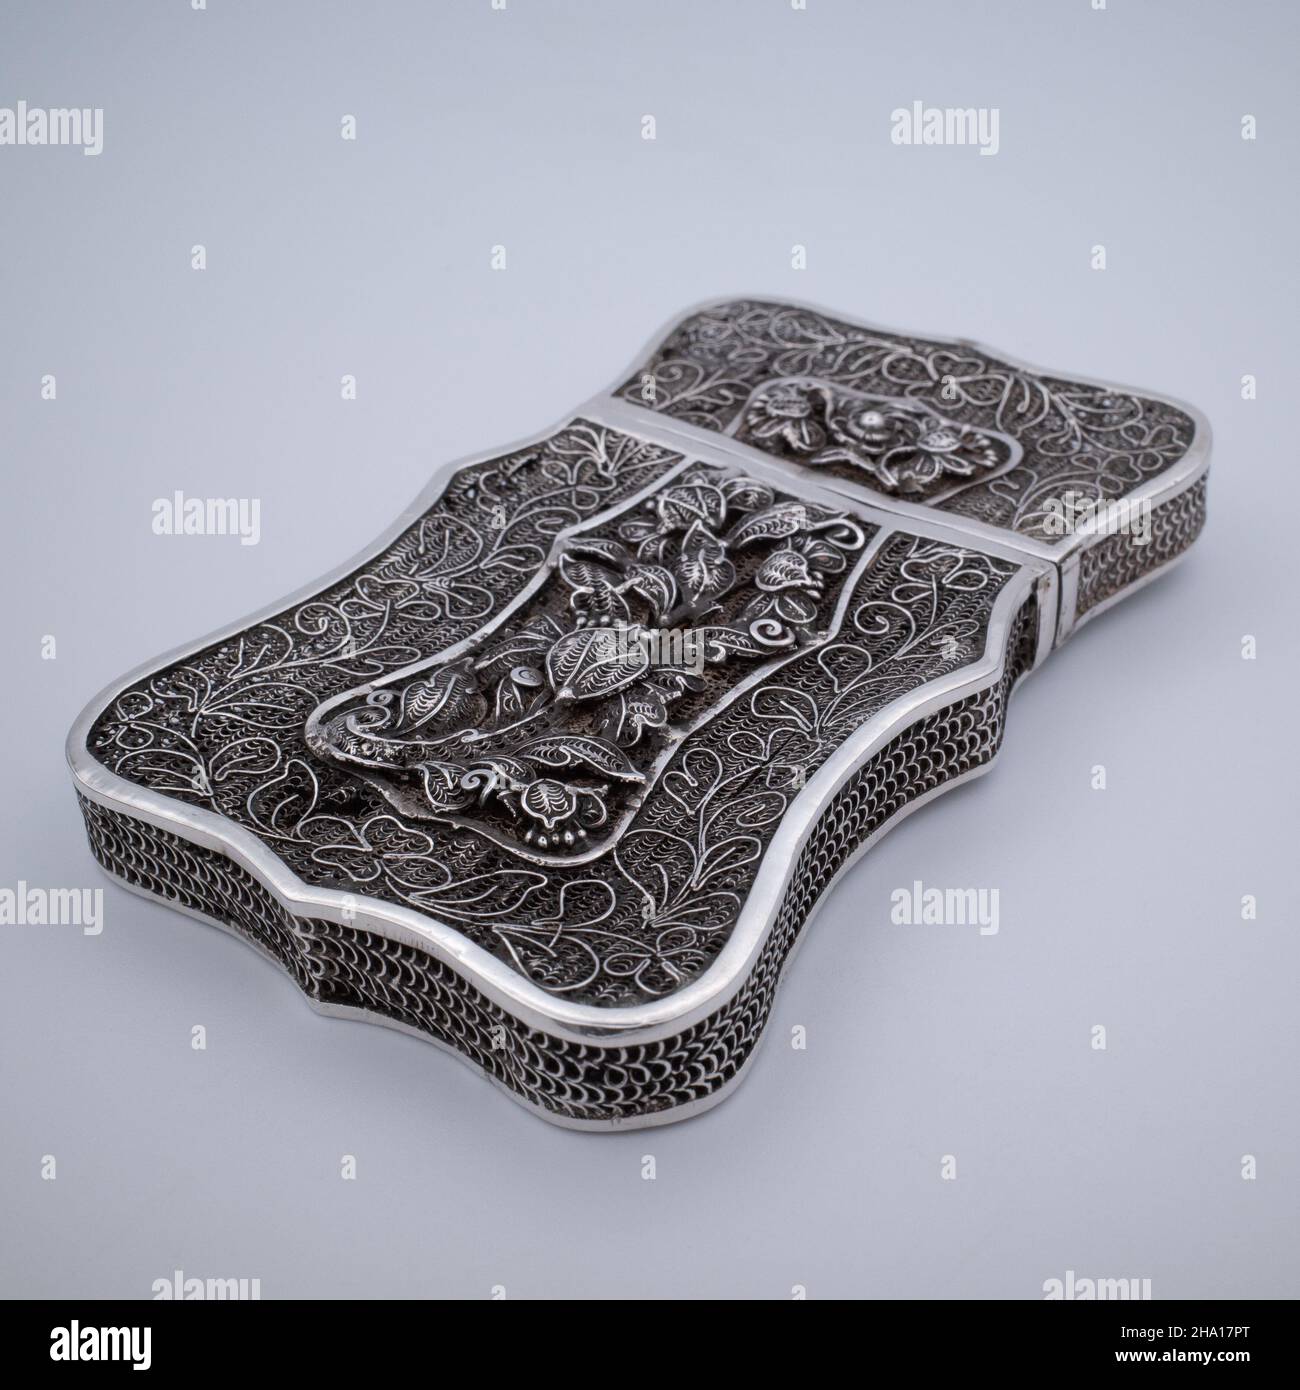 Antique Chinese Export Silver Filigree Card Case with Dragons and Flowers. 19th century Stock Photo